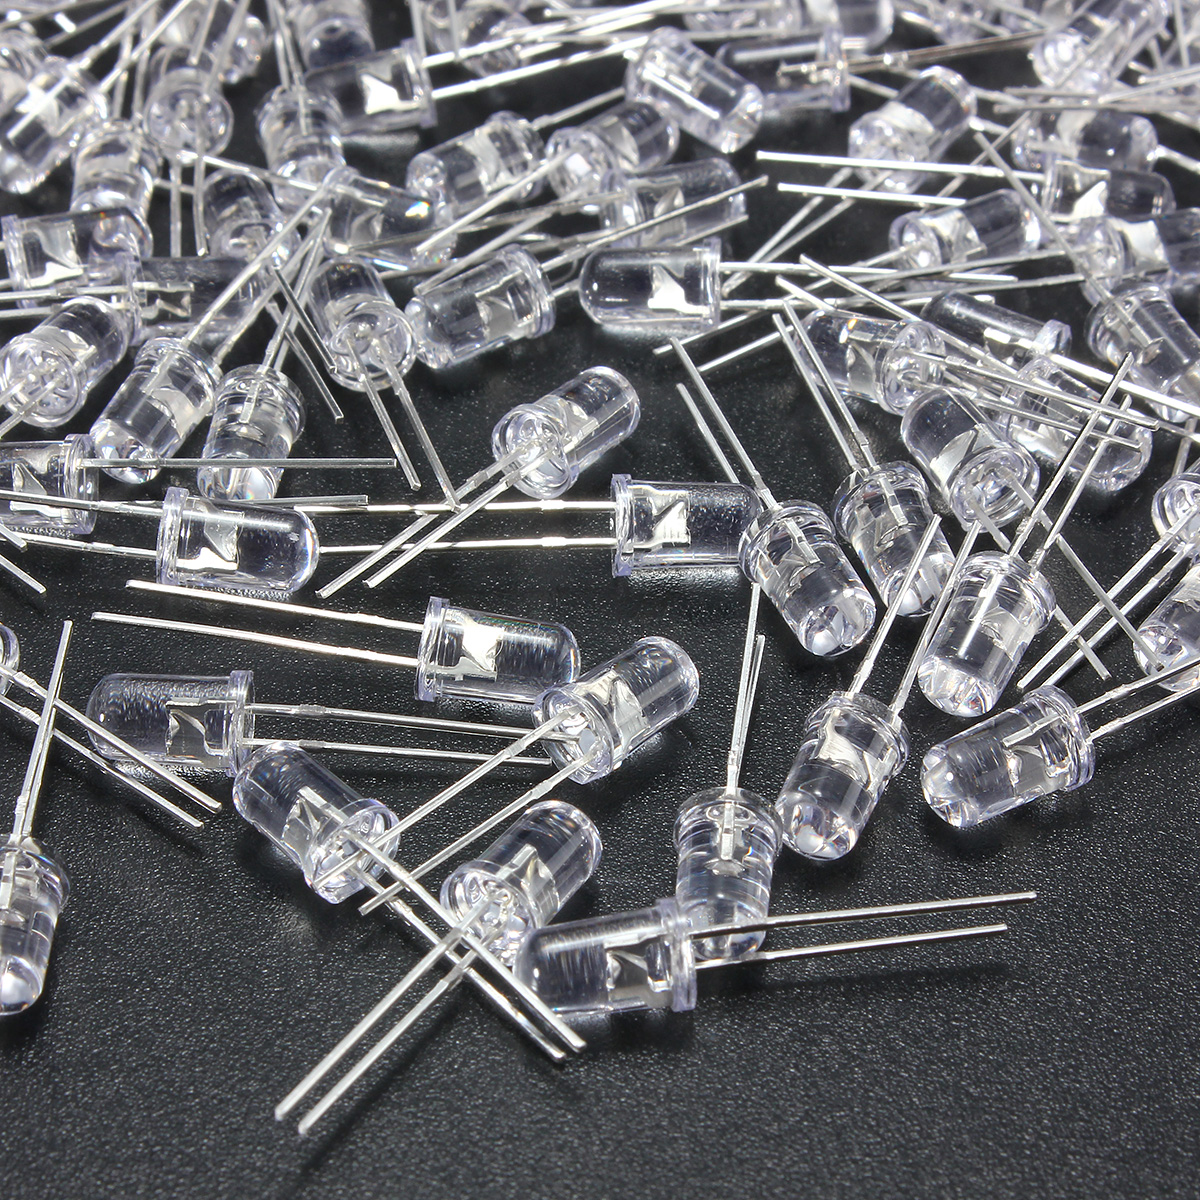 1000PCS-5MM-Round-Red-Green-Blue-Yellow-White-Water-Clear-LED-Diodes-Light-Kit-1074372